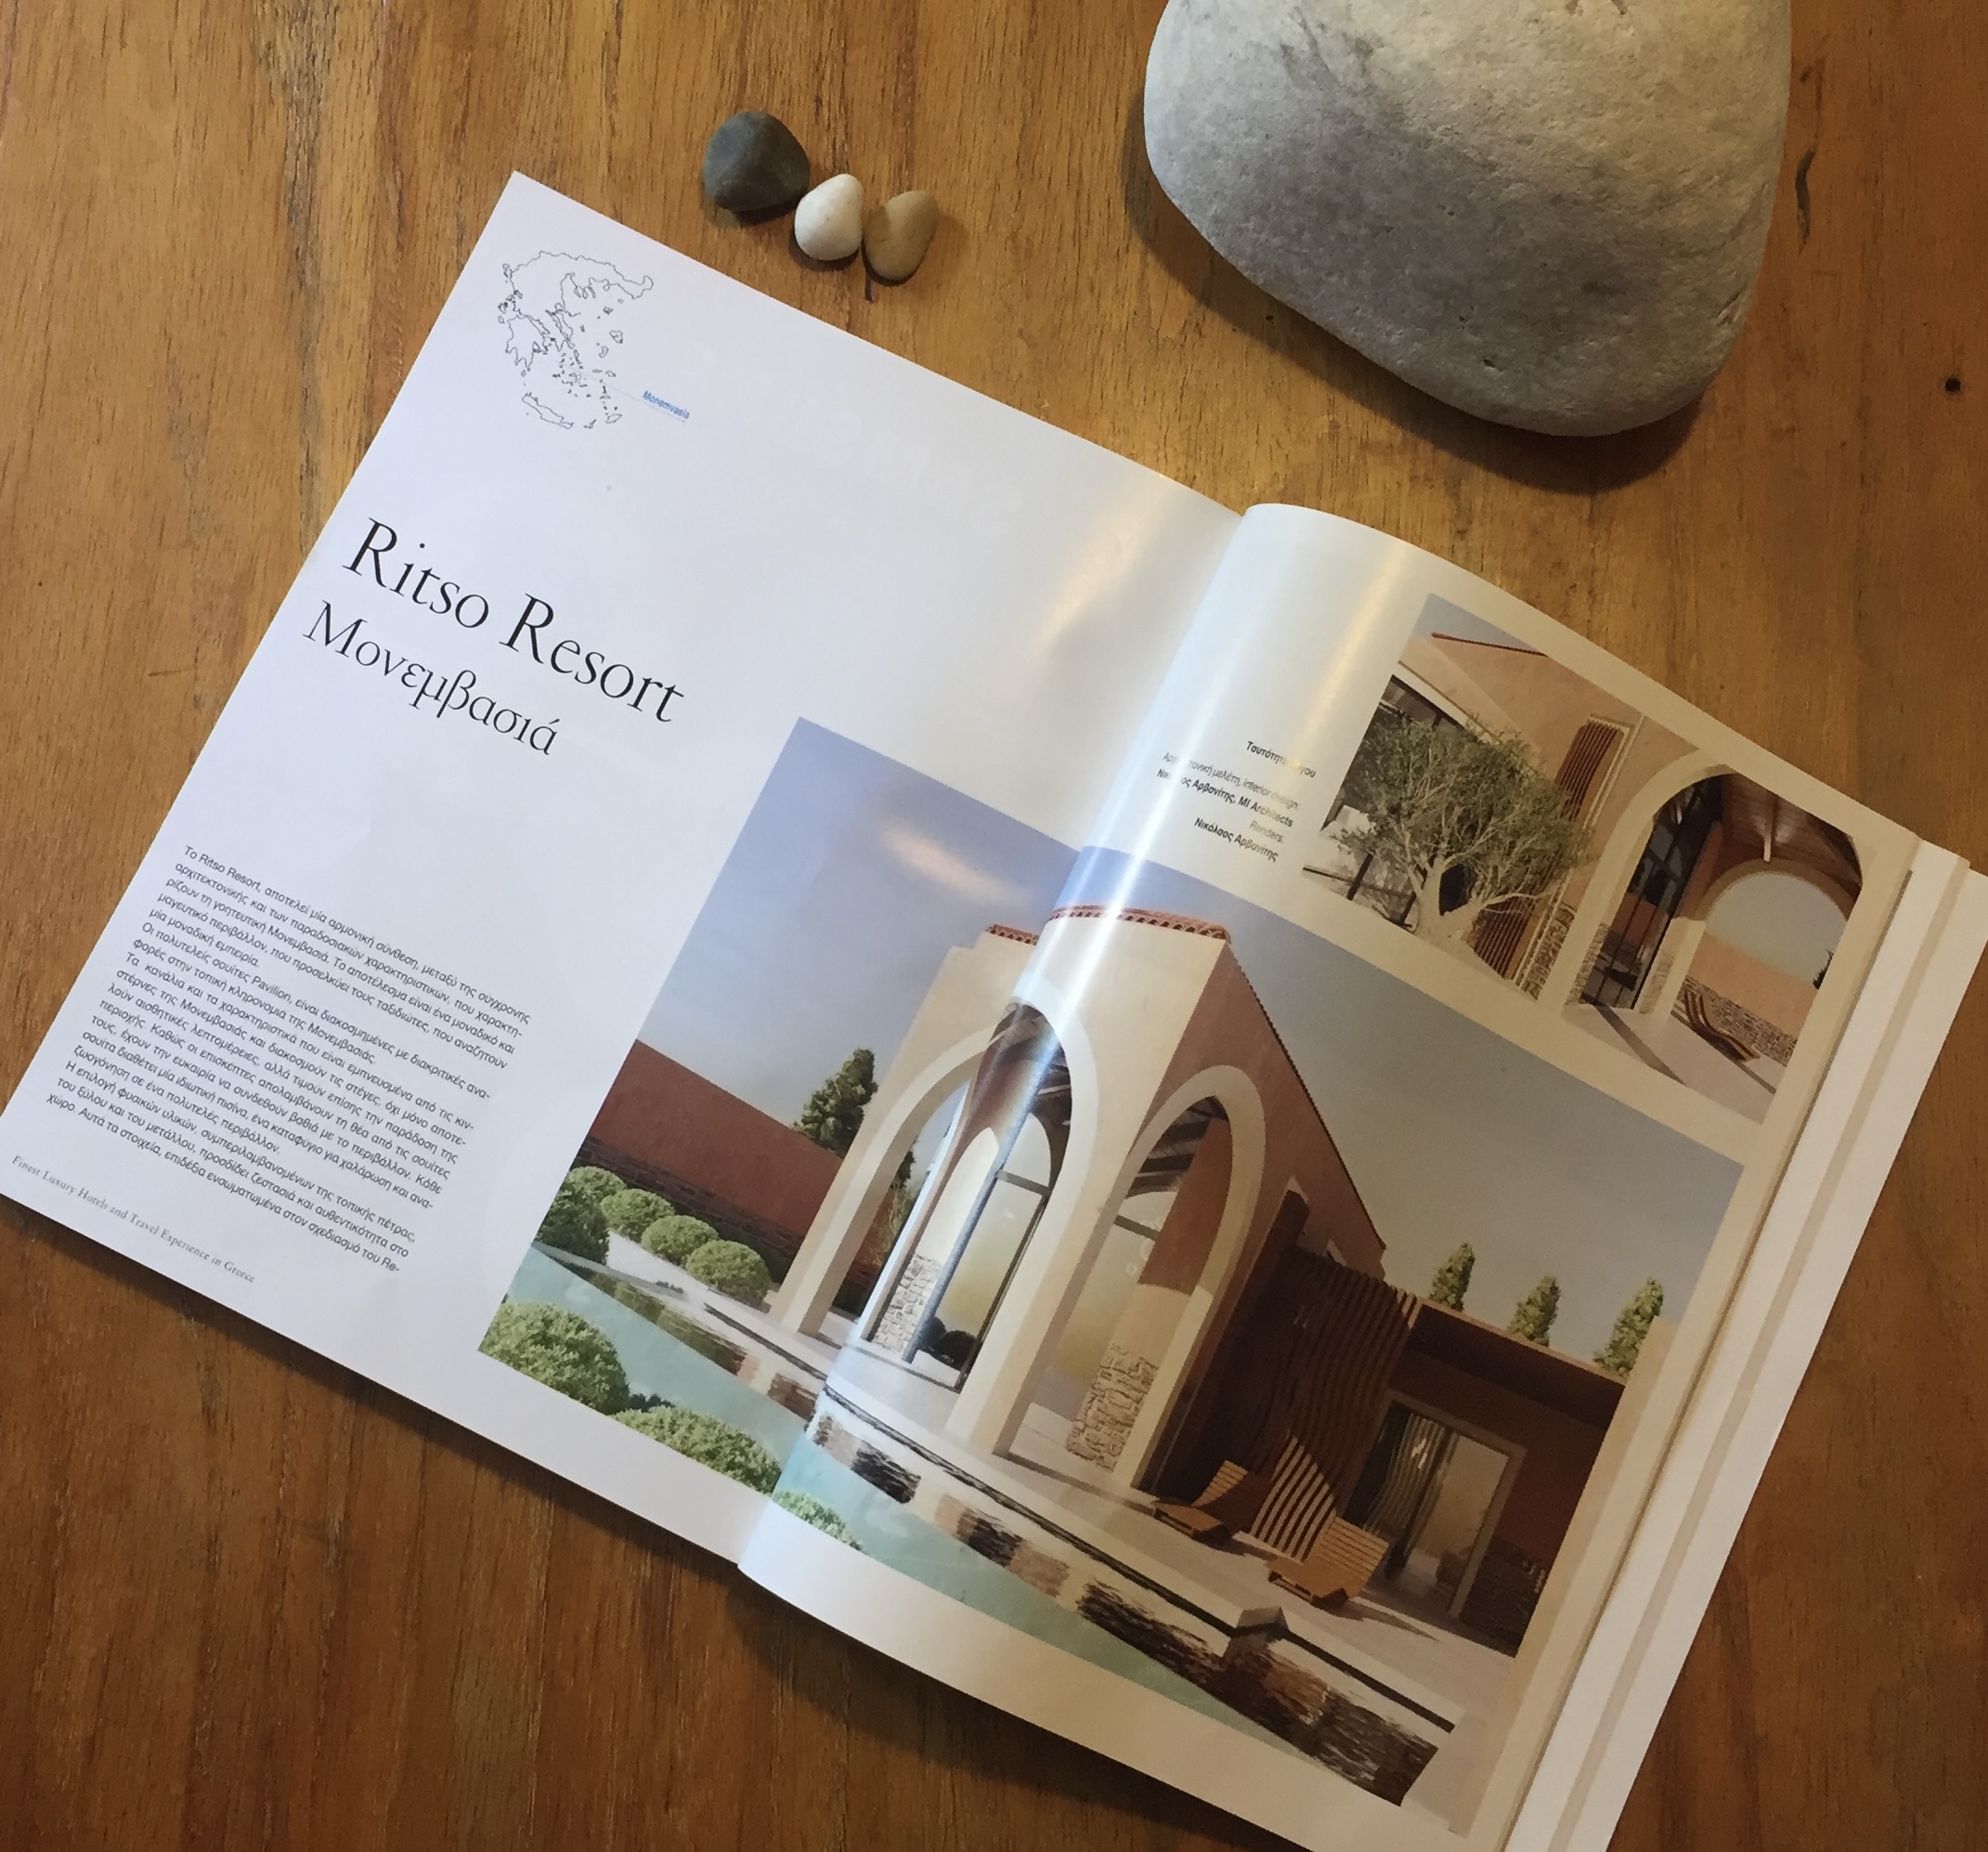 The RITSO Hotel is featured in the prestigious annual edition 'Hotels 2023' by the renowned publishers Ili & Ktirio, shining brightly among the standout projects in the latest releases from Ili and Ktirio editions. Architectural brilliance & Interior design excellence: Nikolaos Arvanitis, Visualization: MI Architects.